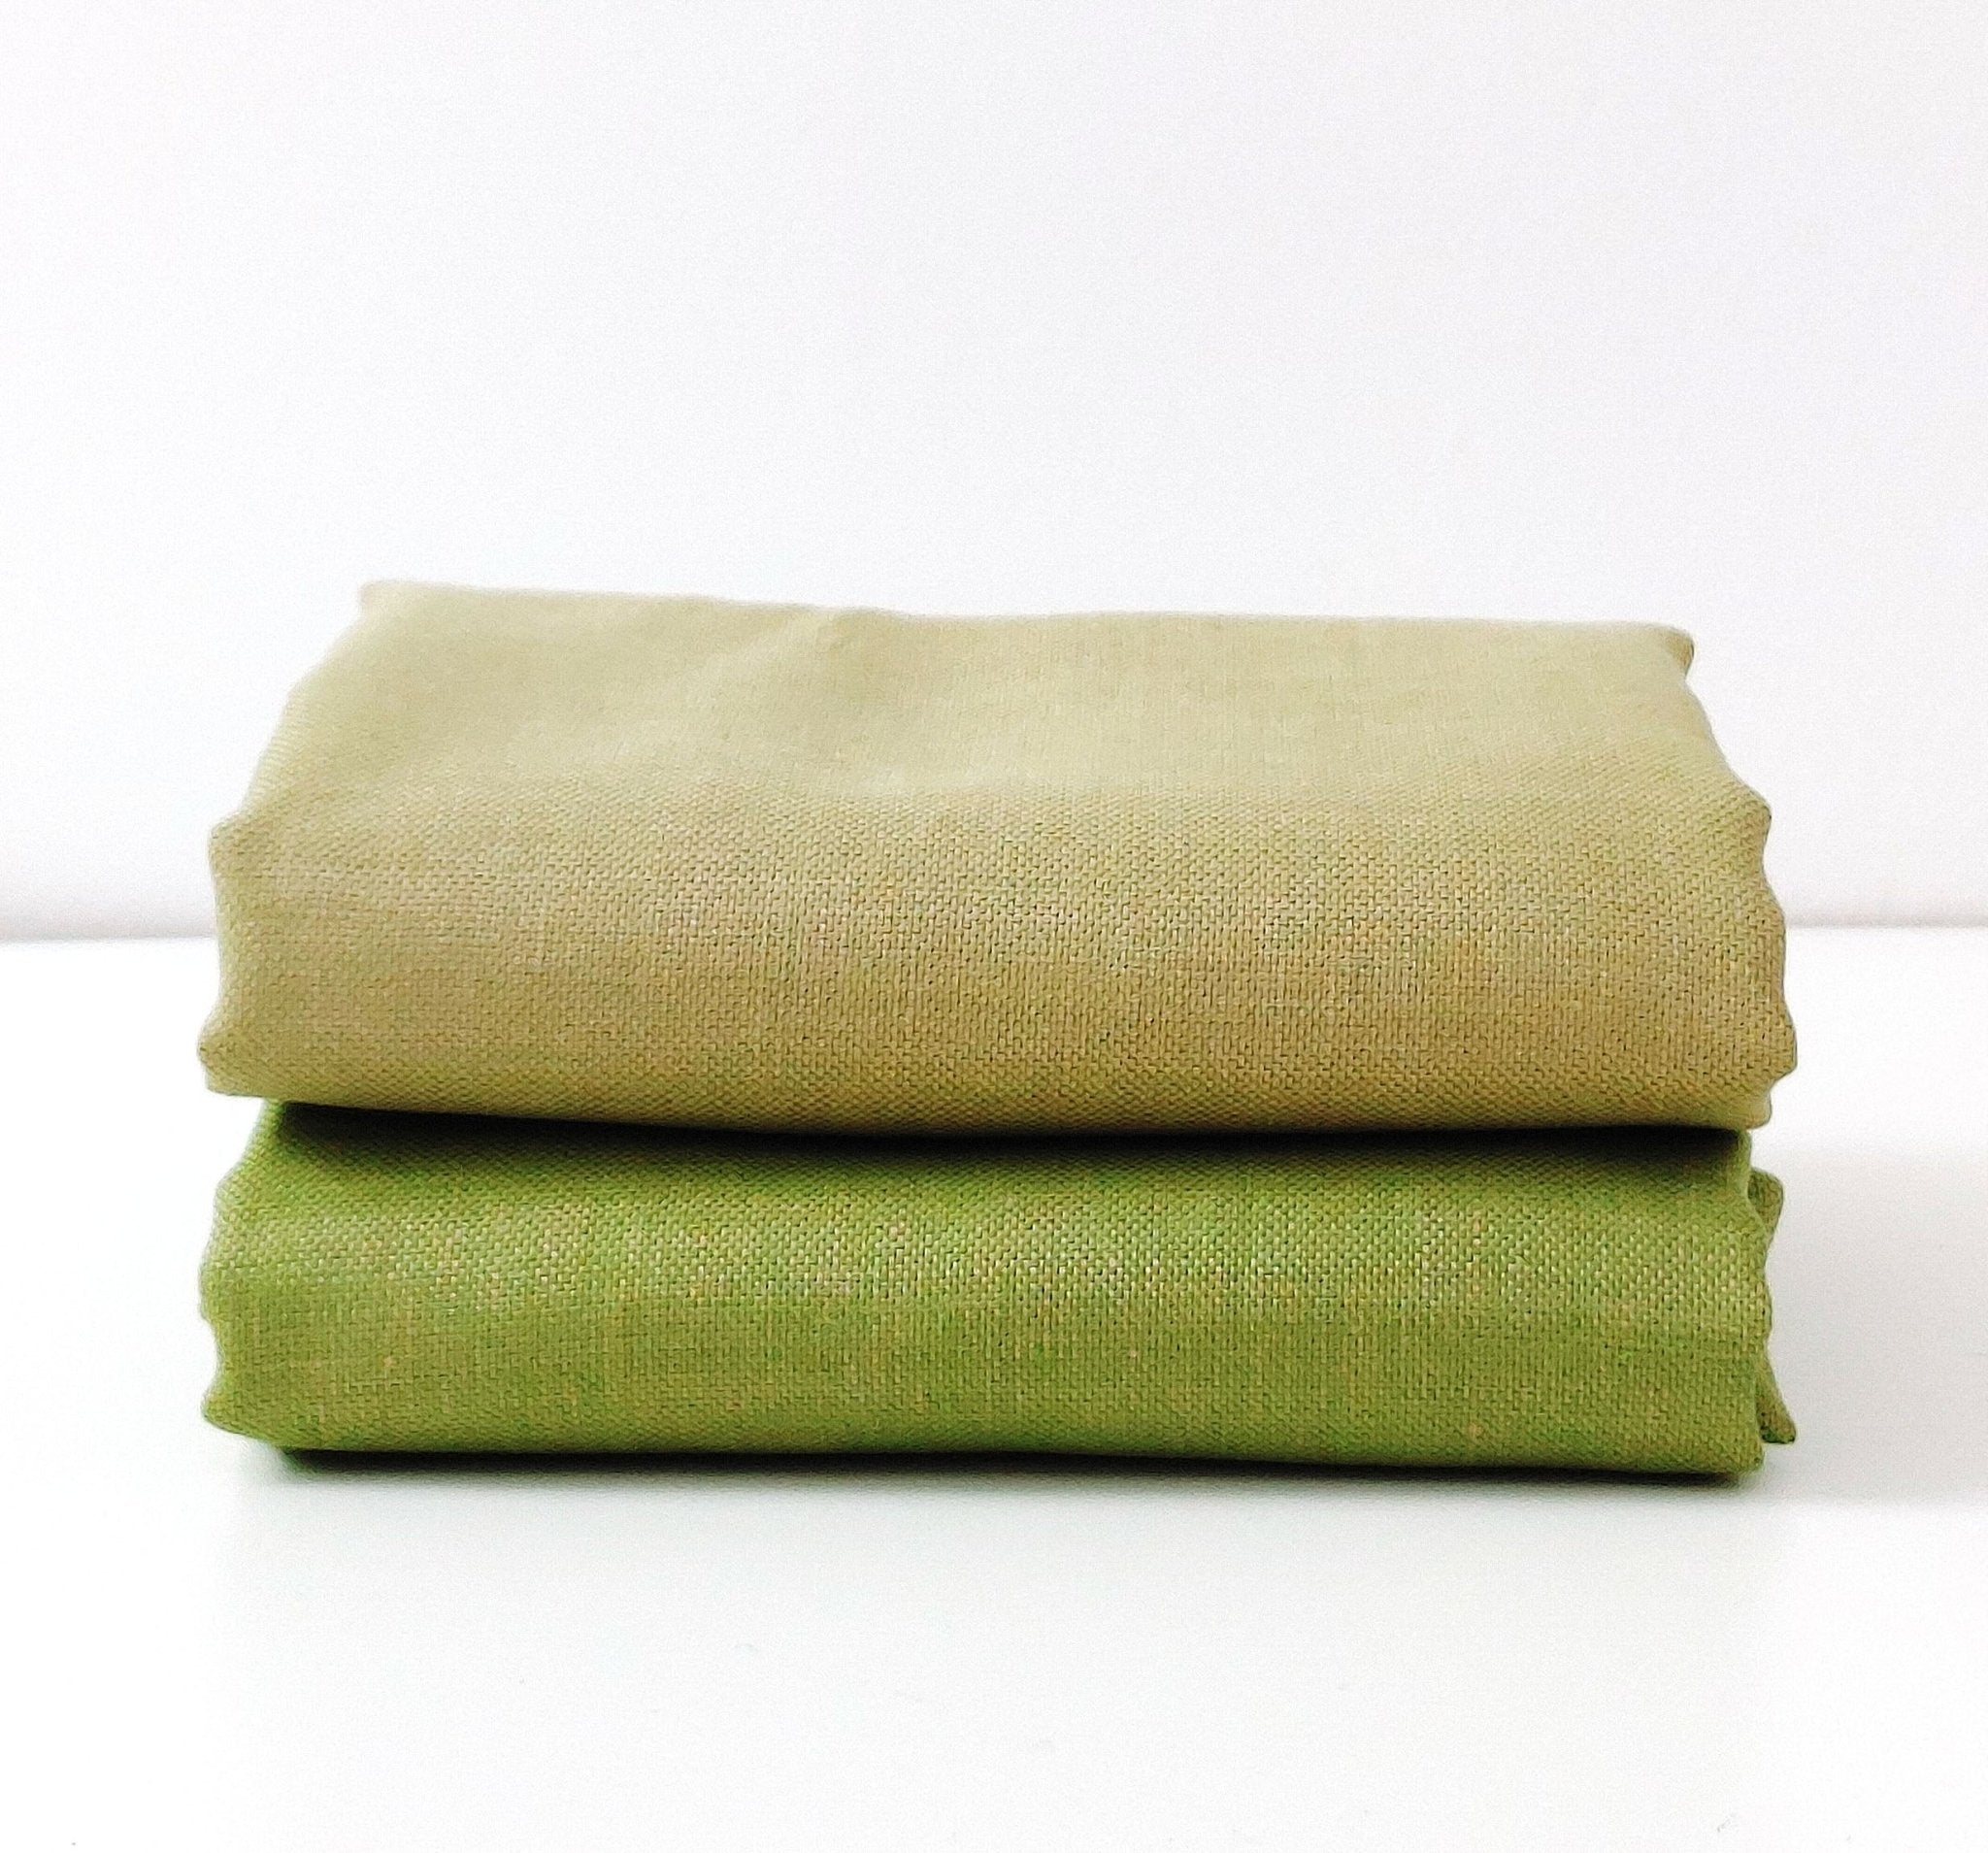 100% Linen Canvas Chambray Fabric 3455 1702 - The Linen Lab - Green